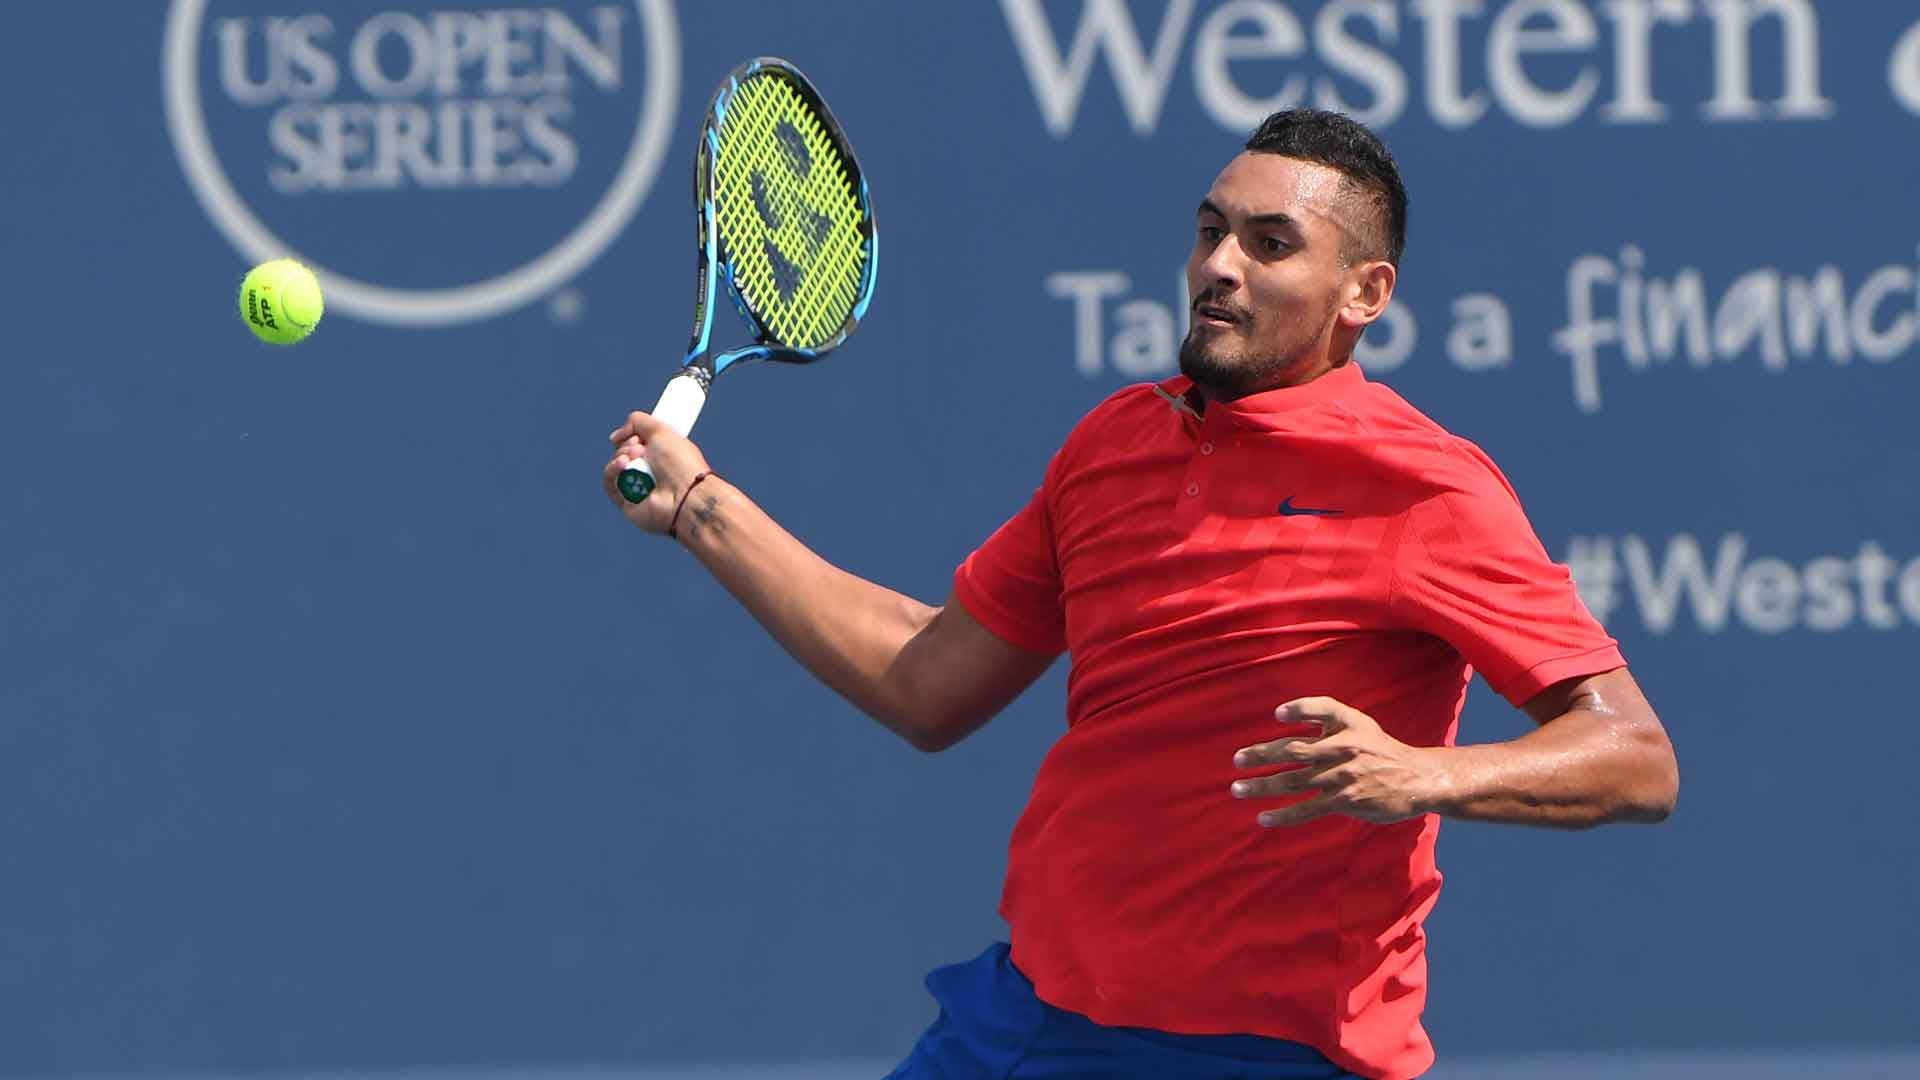 Nick Kyrgios Us Open Series Background